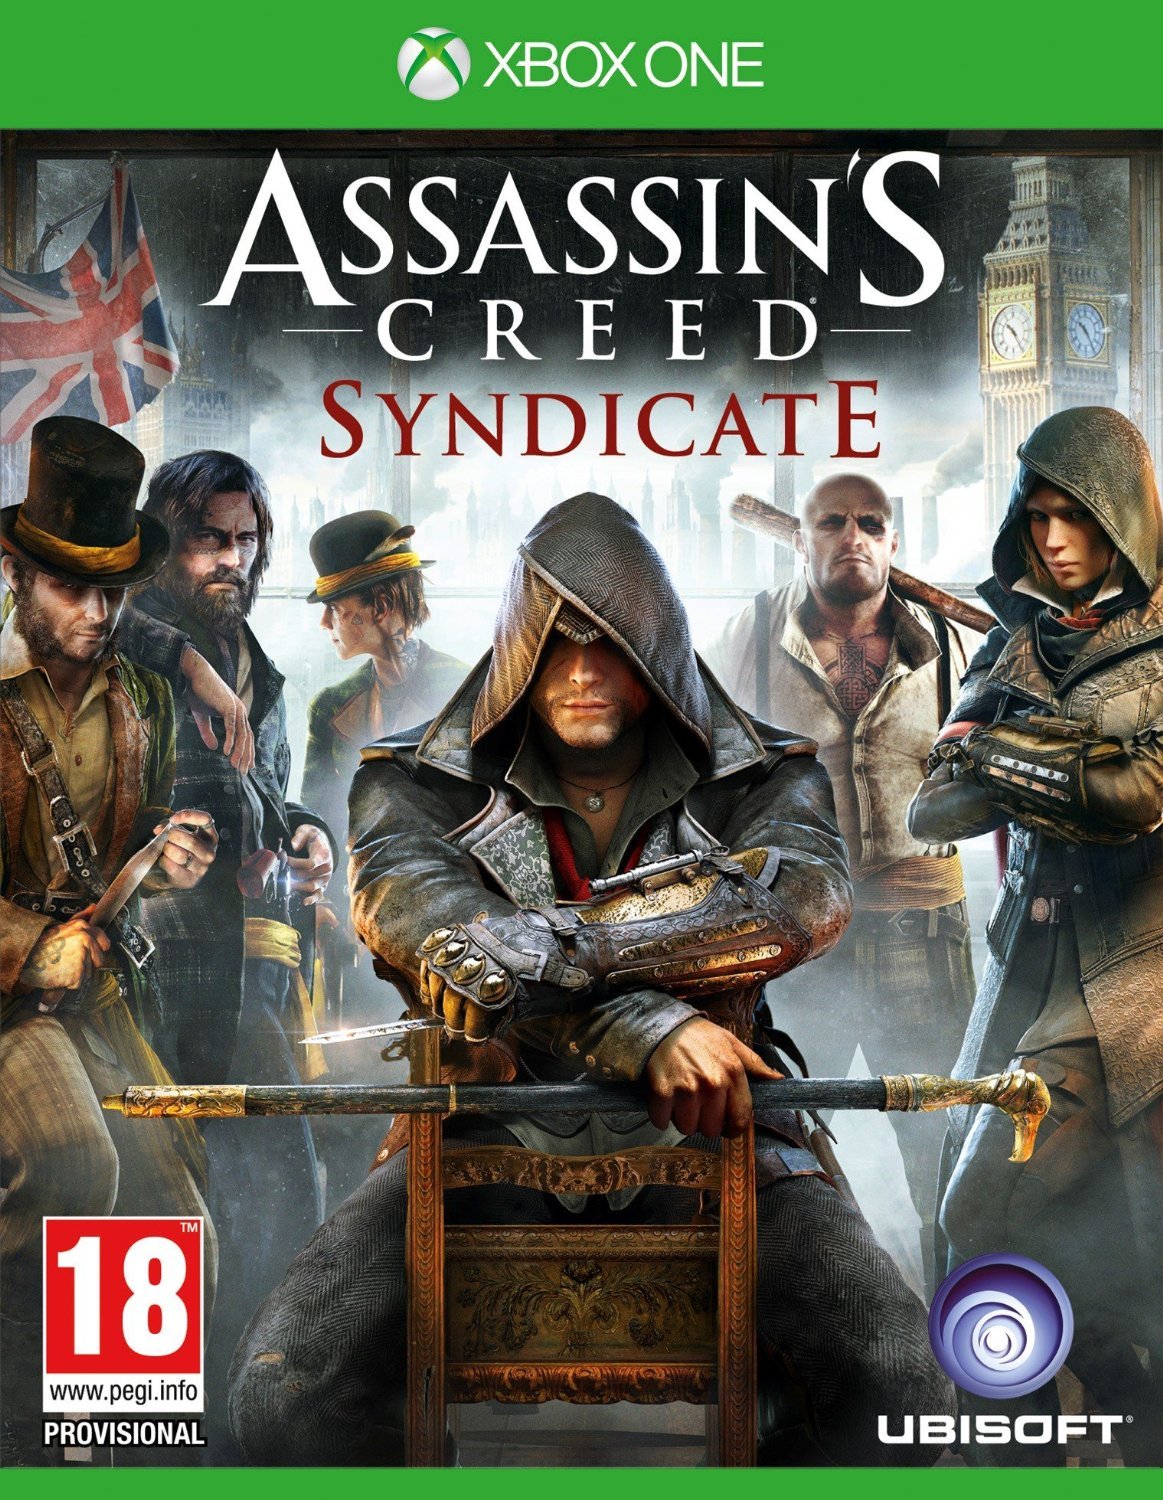 Assassin's Creed Syndicate Xbox